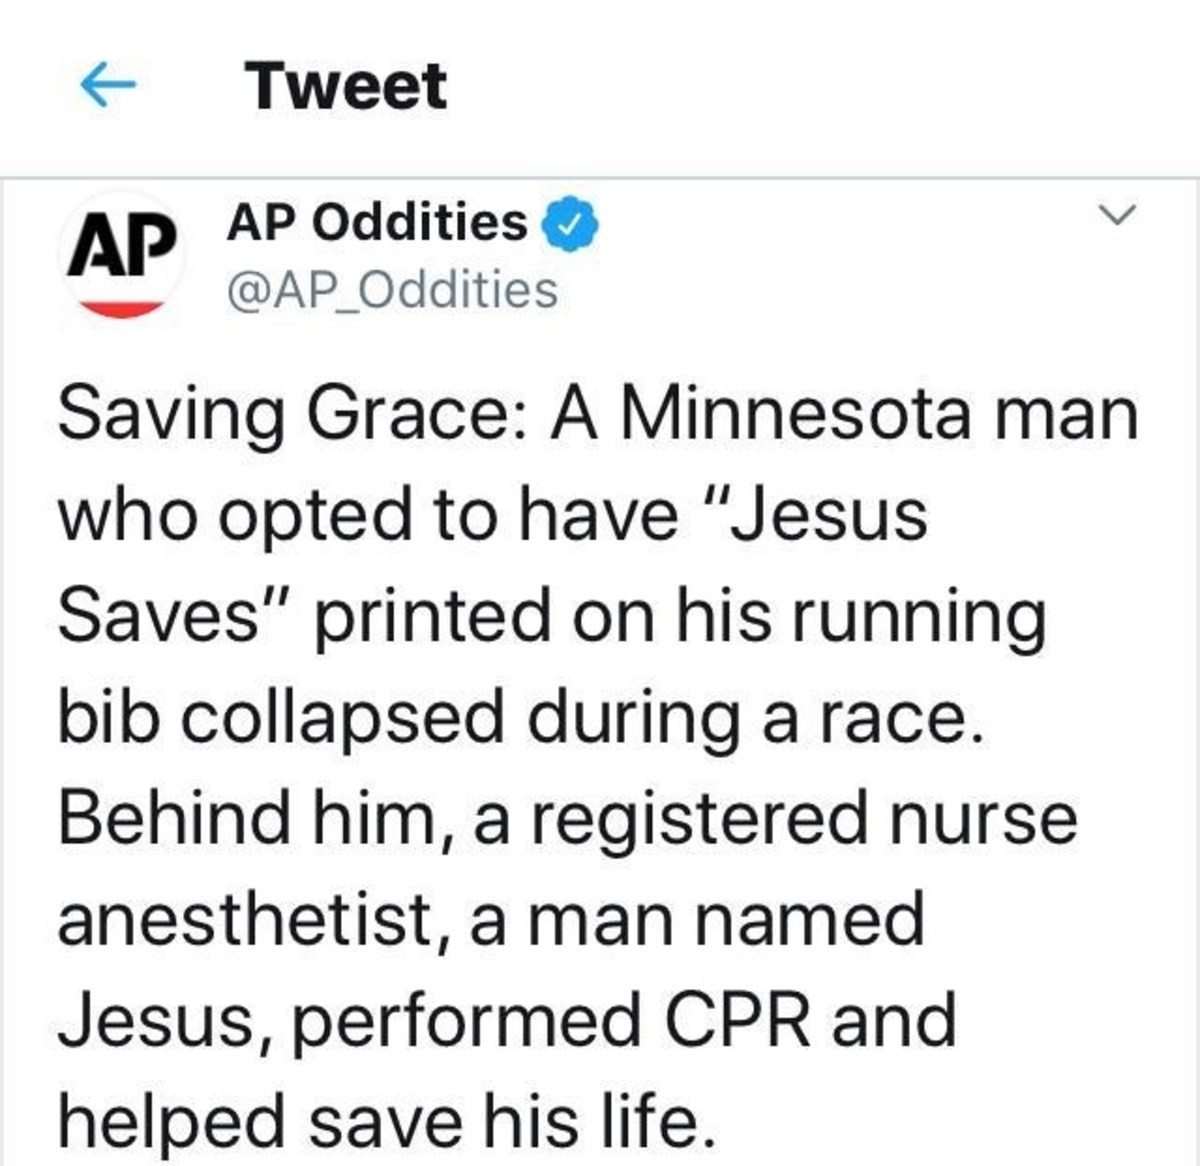 document - Tweet Ap Oddities Saving Grace A Minnesota man who opted to have "Jesus Saves" printed on his running bib collapsed during a race. Behind him, a registered nurse anesthetist, a man named Jesus, performed Cpr and helped save his life.